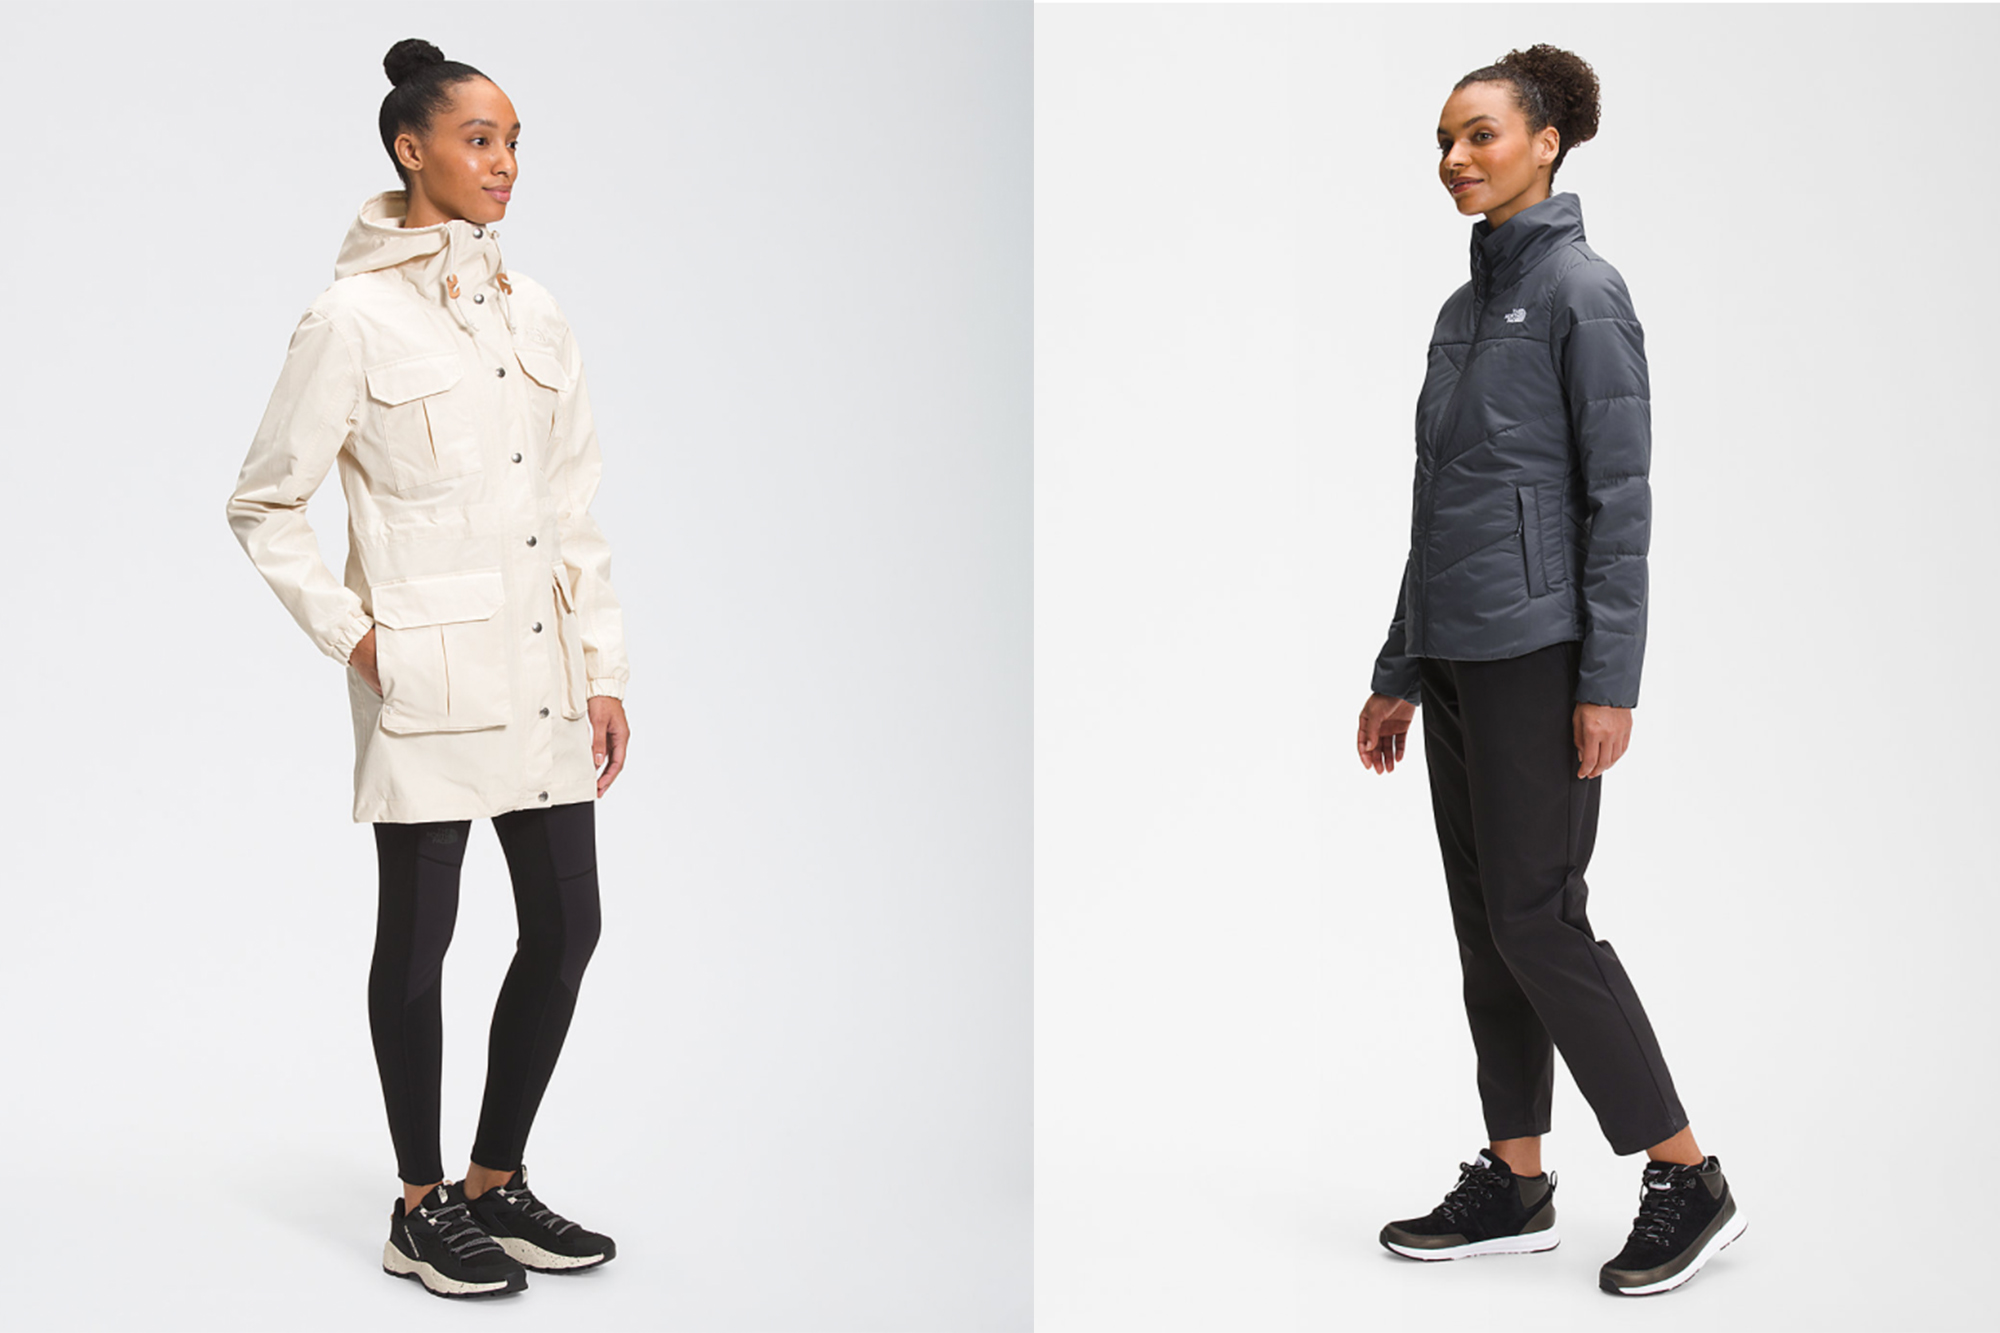 The North Face Friday Jacket Deals To Shop Now — 40% Off!